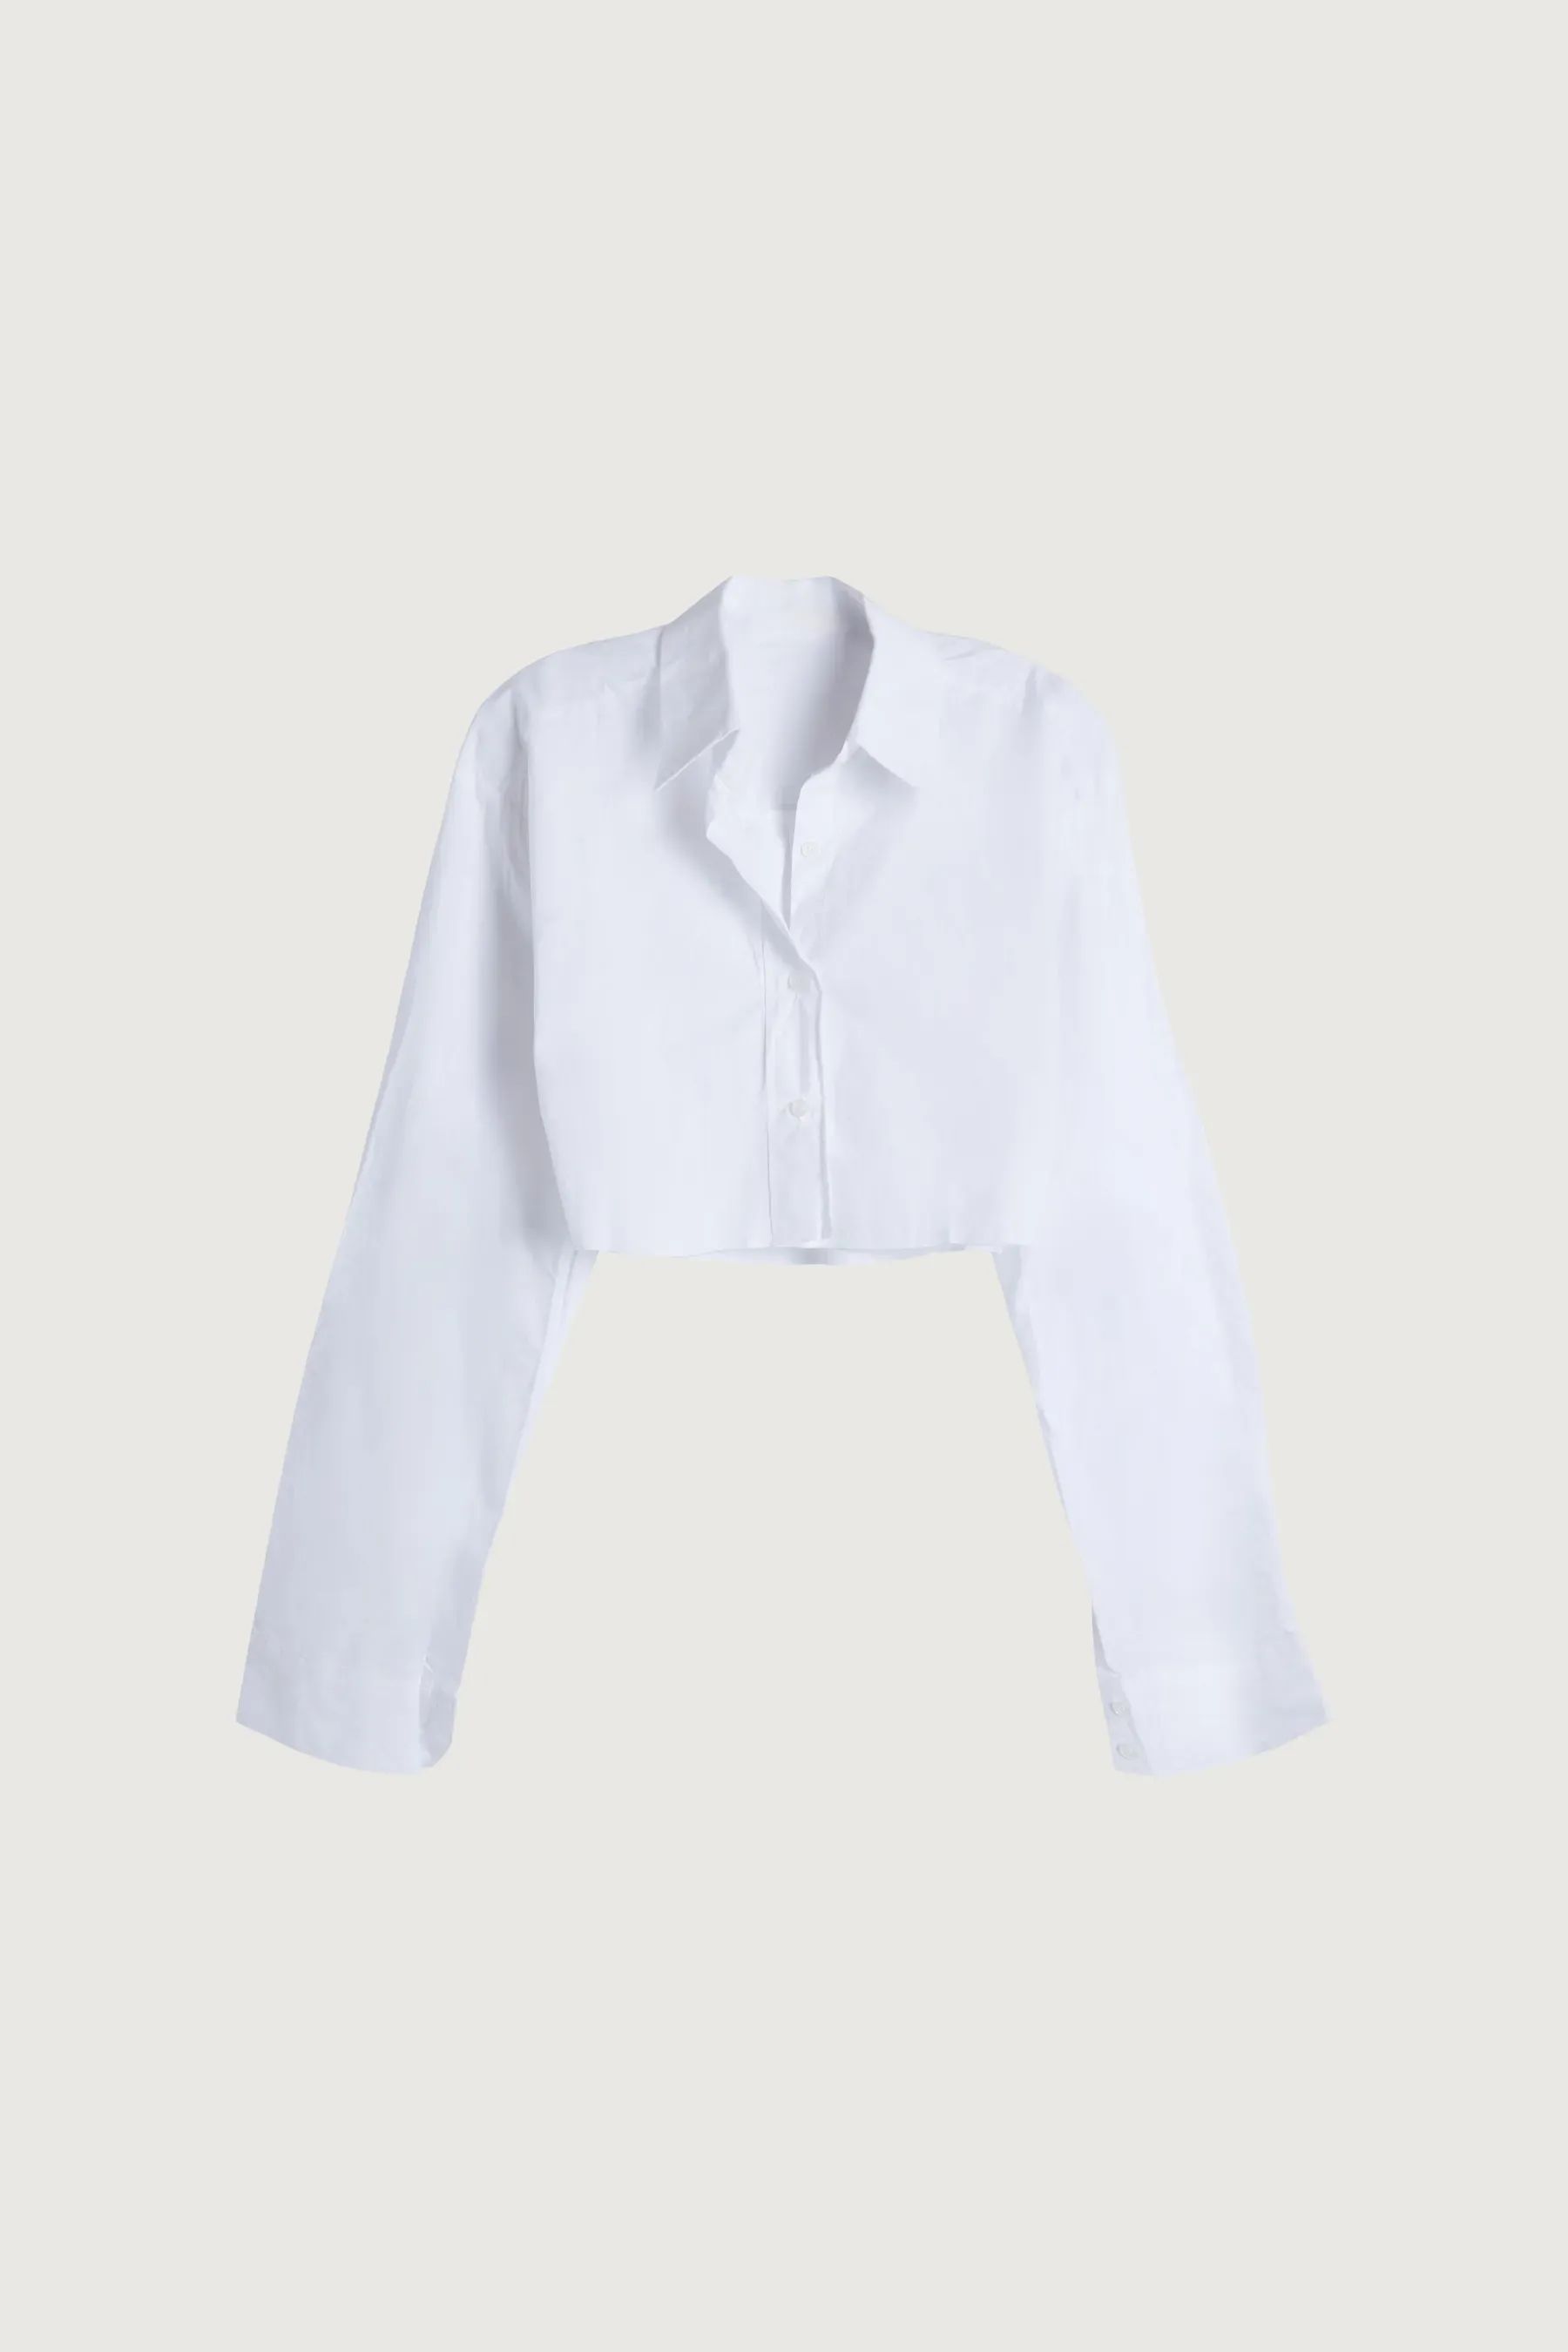 CROPPED BUTTON-UP SHIRT | OAK + FORT